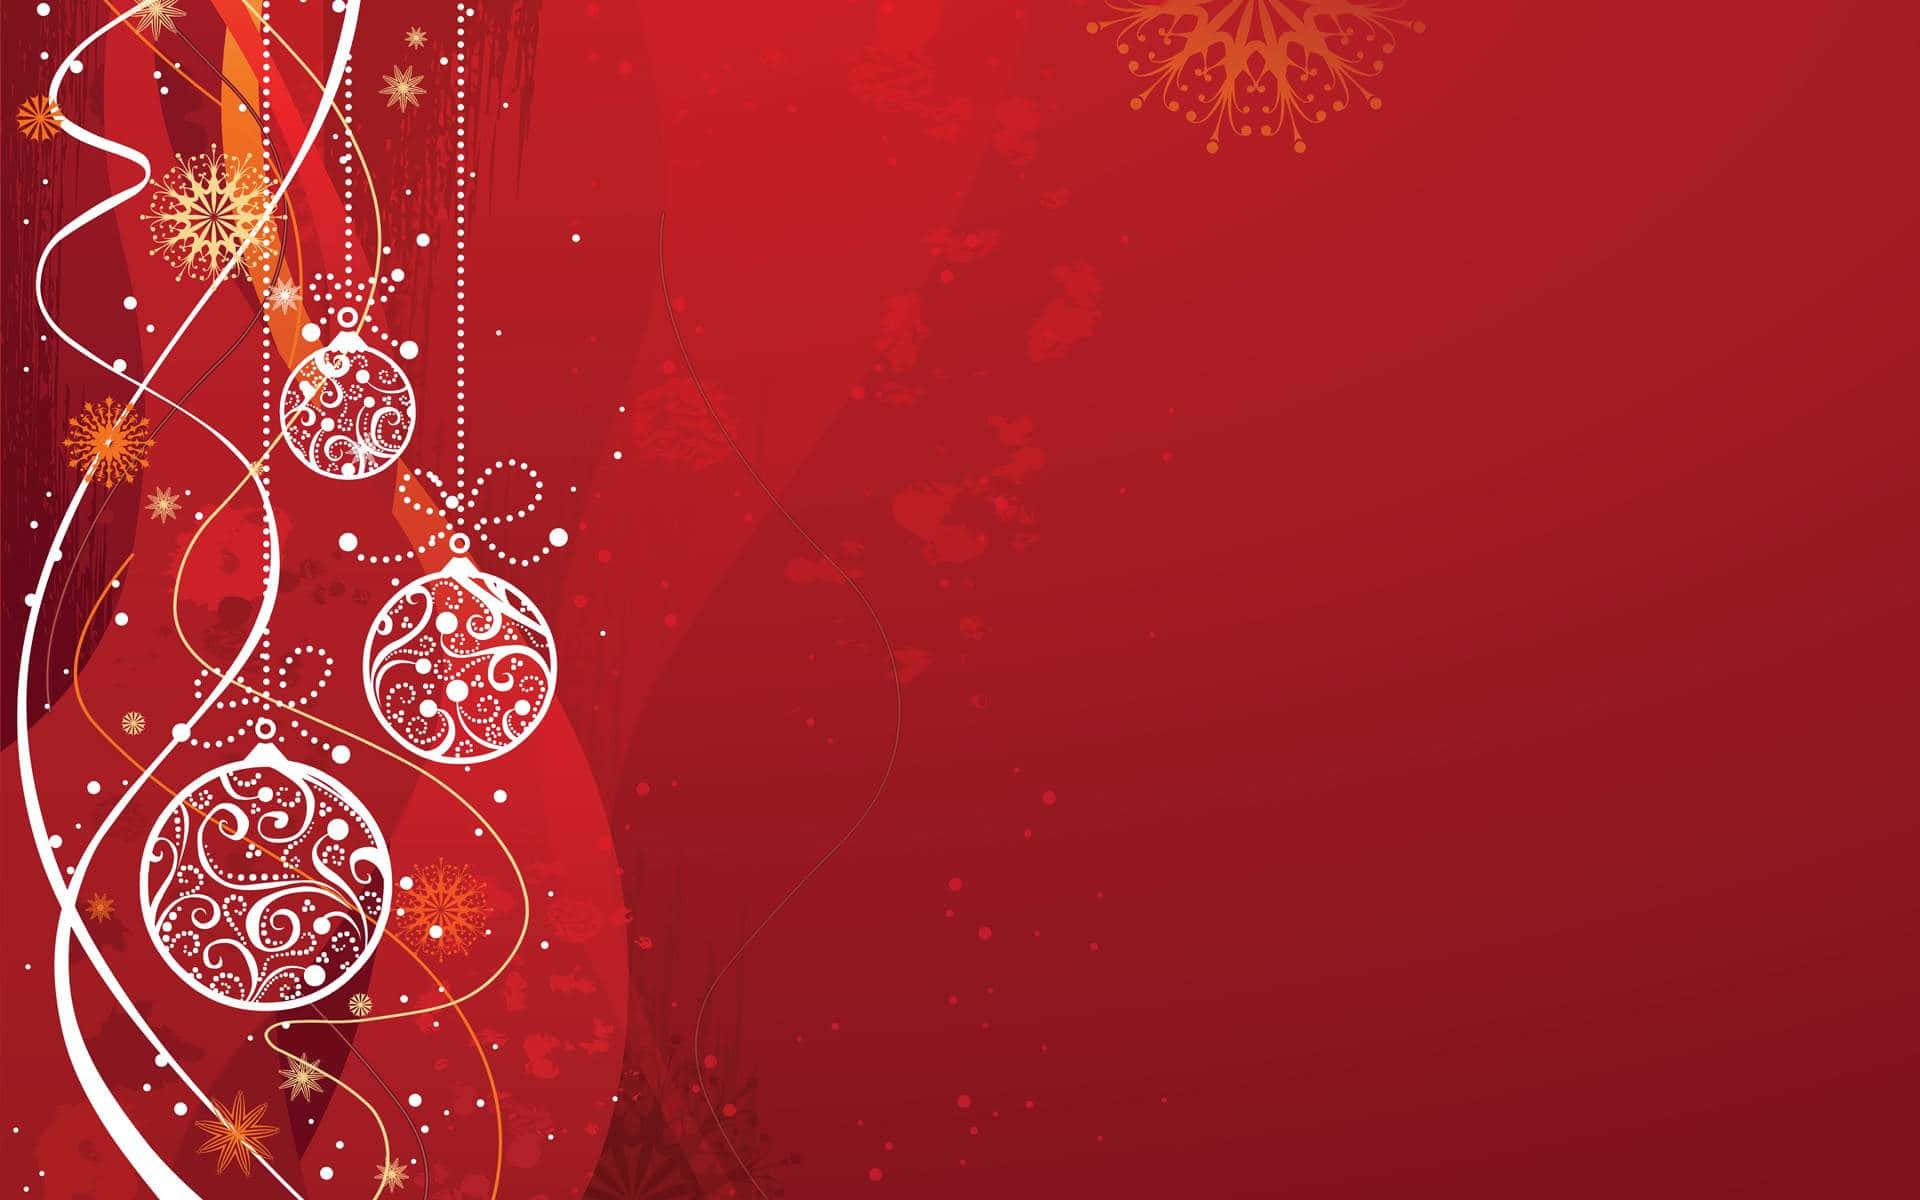 Celebrate the Holiday Spirit with a Bright and Colorful Christmas Backdrop